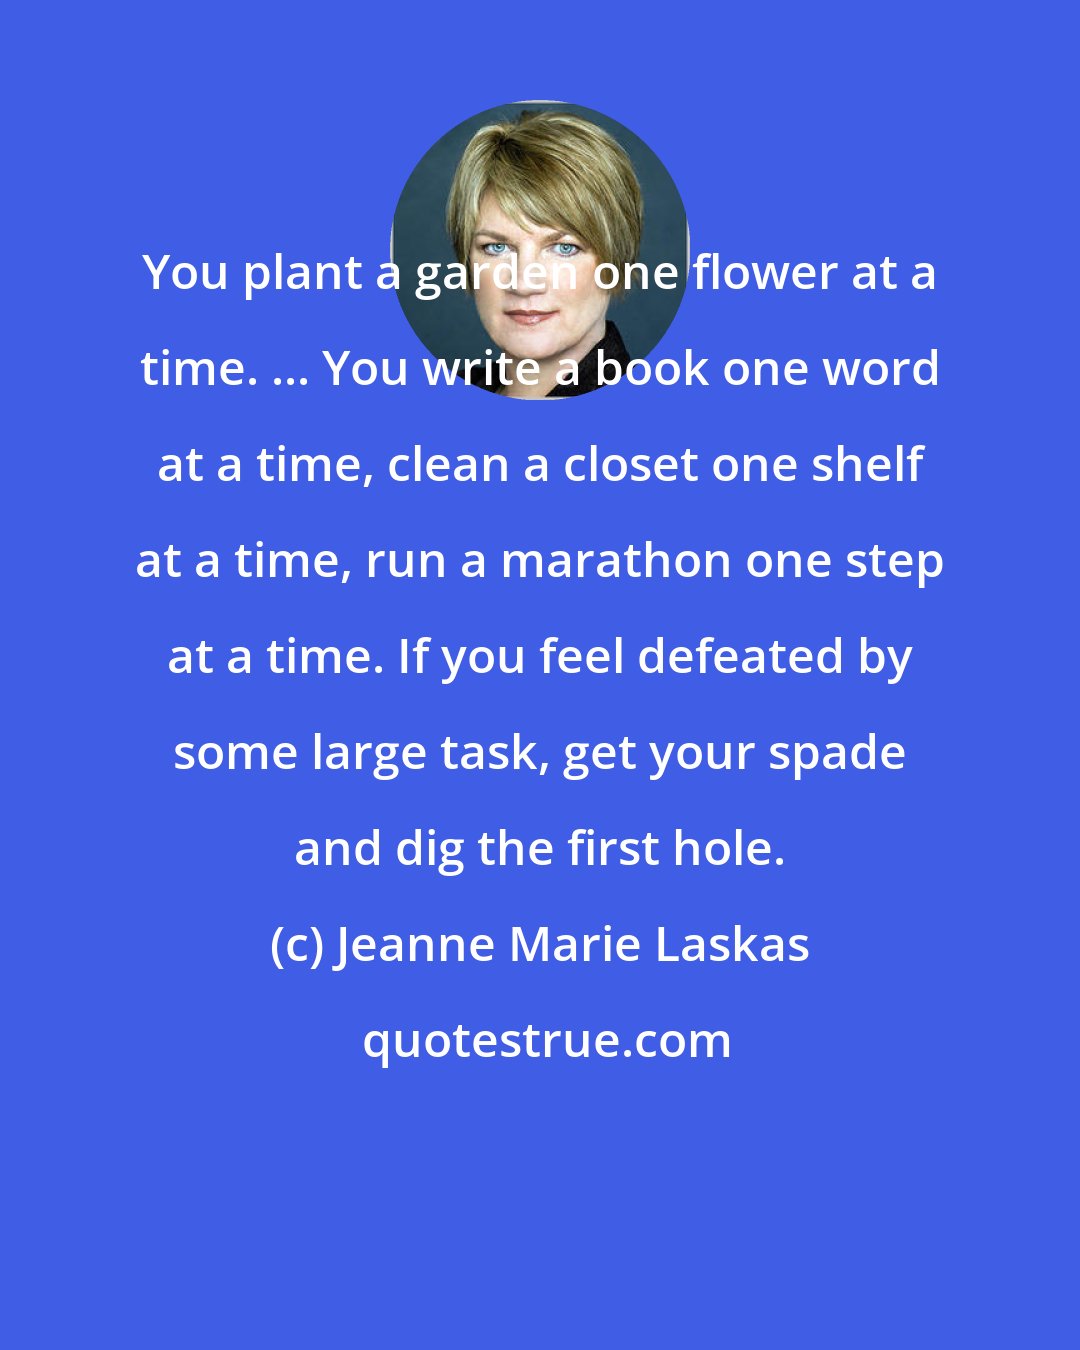 Jeanne Marie Laskas: You plant a garden one flower at a time. ... You write a book one word at a time, clean a closet one shelf at a time, run a marathon one step at a time. If you feel defeated by some large task, get your spade and dig the first hole.